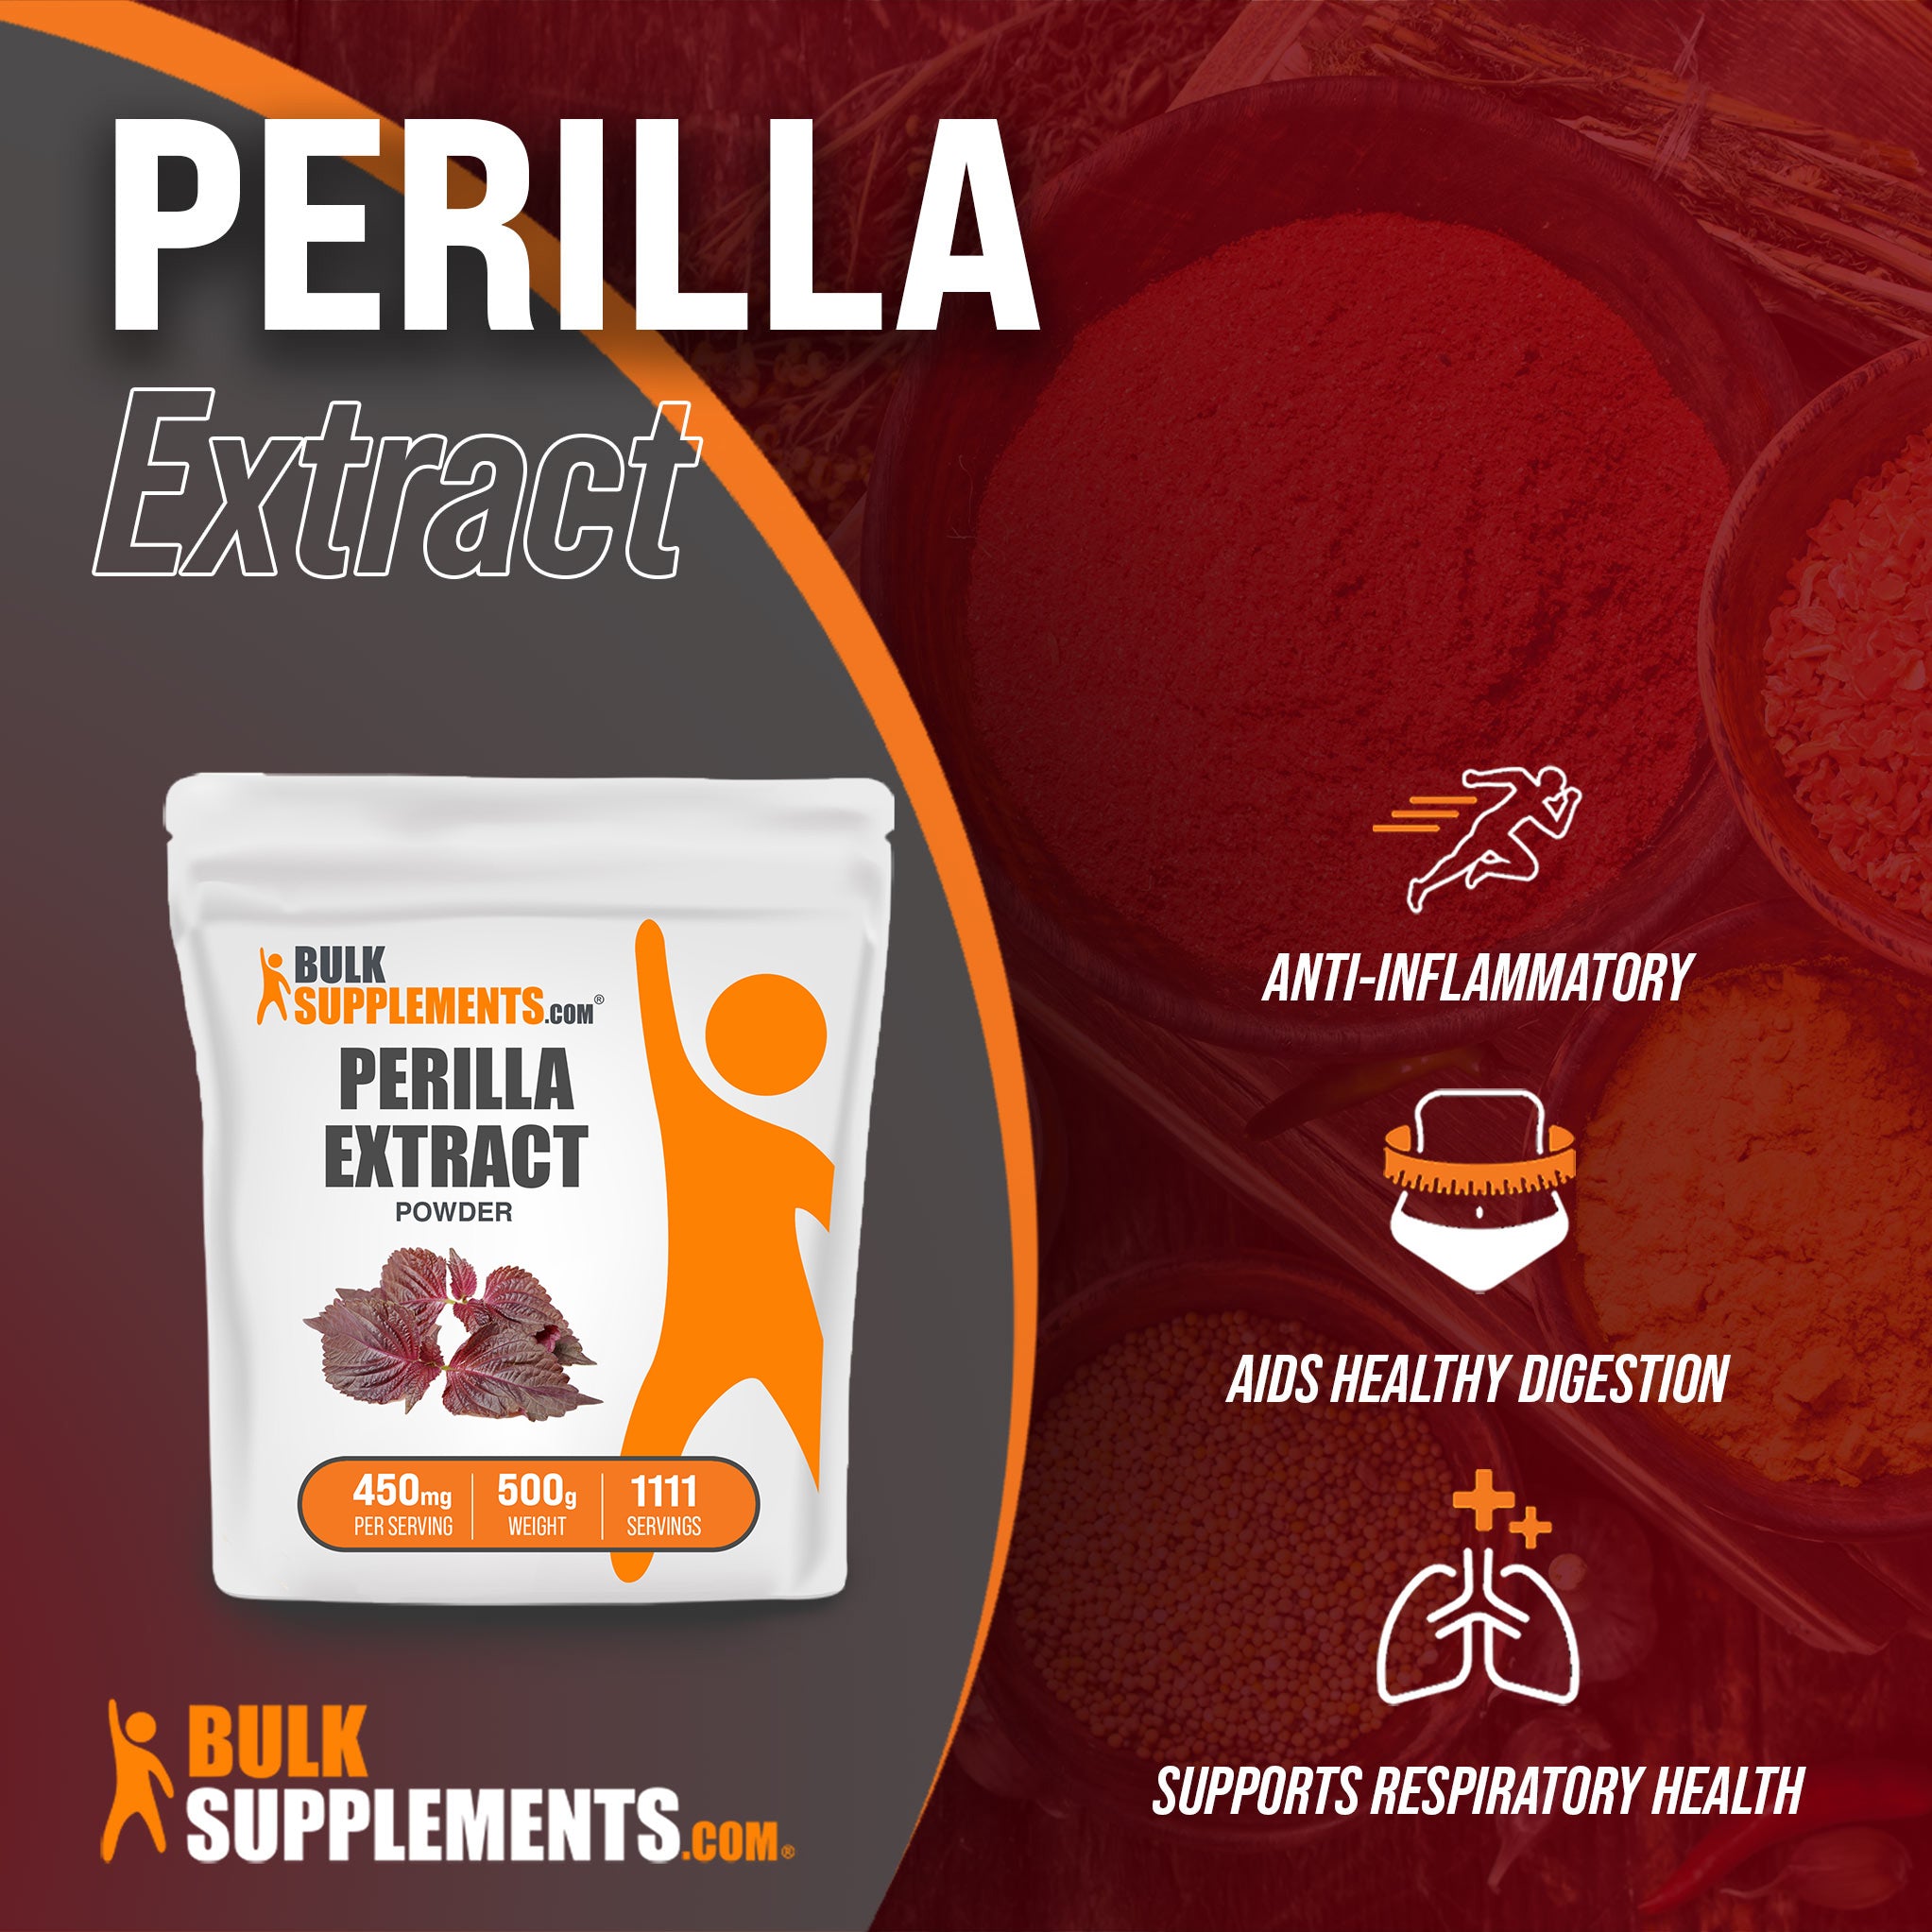 Benefits of Perilla Extract: anti-inflammatory, aids healthy digestion, supports respiratory health